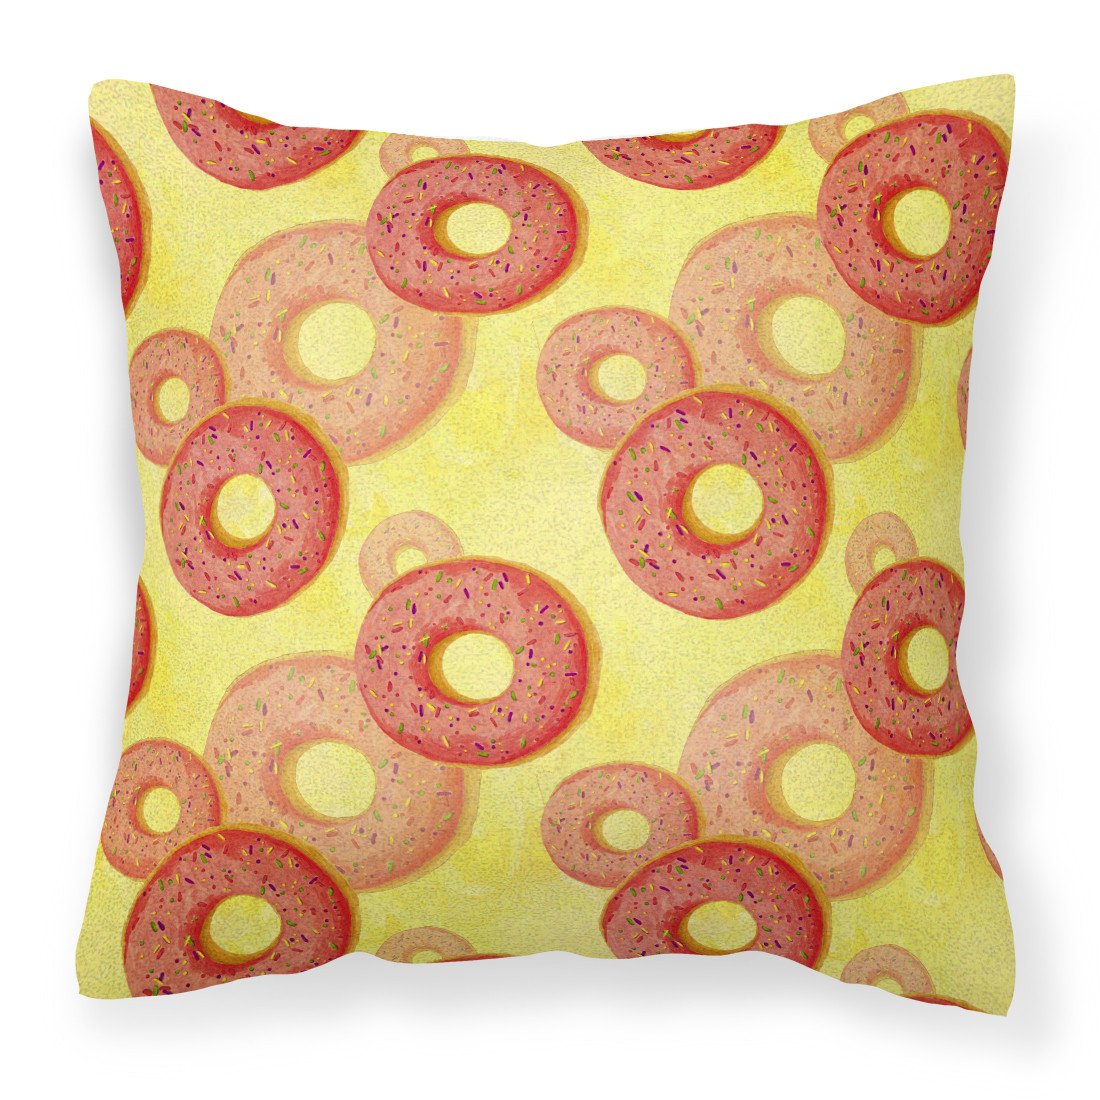 Watercolor Just Donuts Fabric Decorative Pillow BB7561PW1818 by Caroline's Treasures